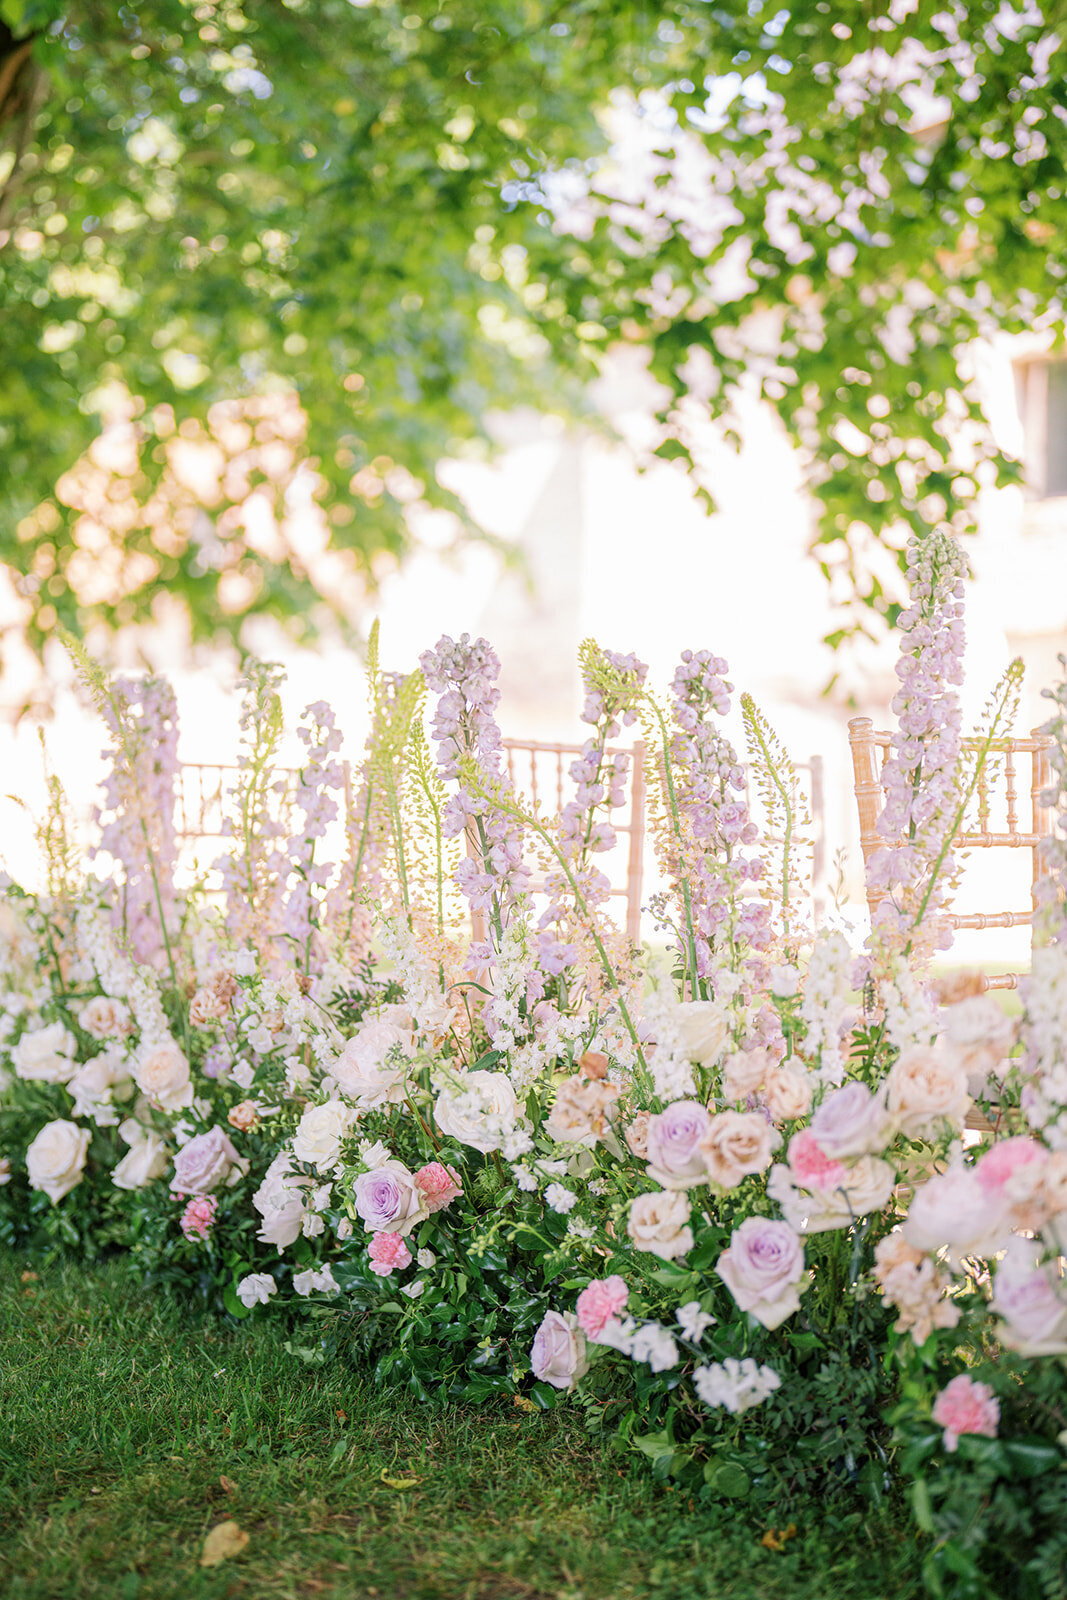 Jennifer Fox Weddings English speaking wedding planning & design agency in France crafting refined and bespoke weddings and celebrations Provence, Paris and destination A&T's Wedding - Harriette Earnshaw Photography-309